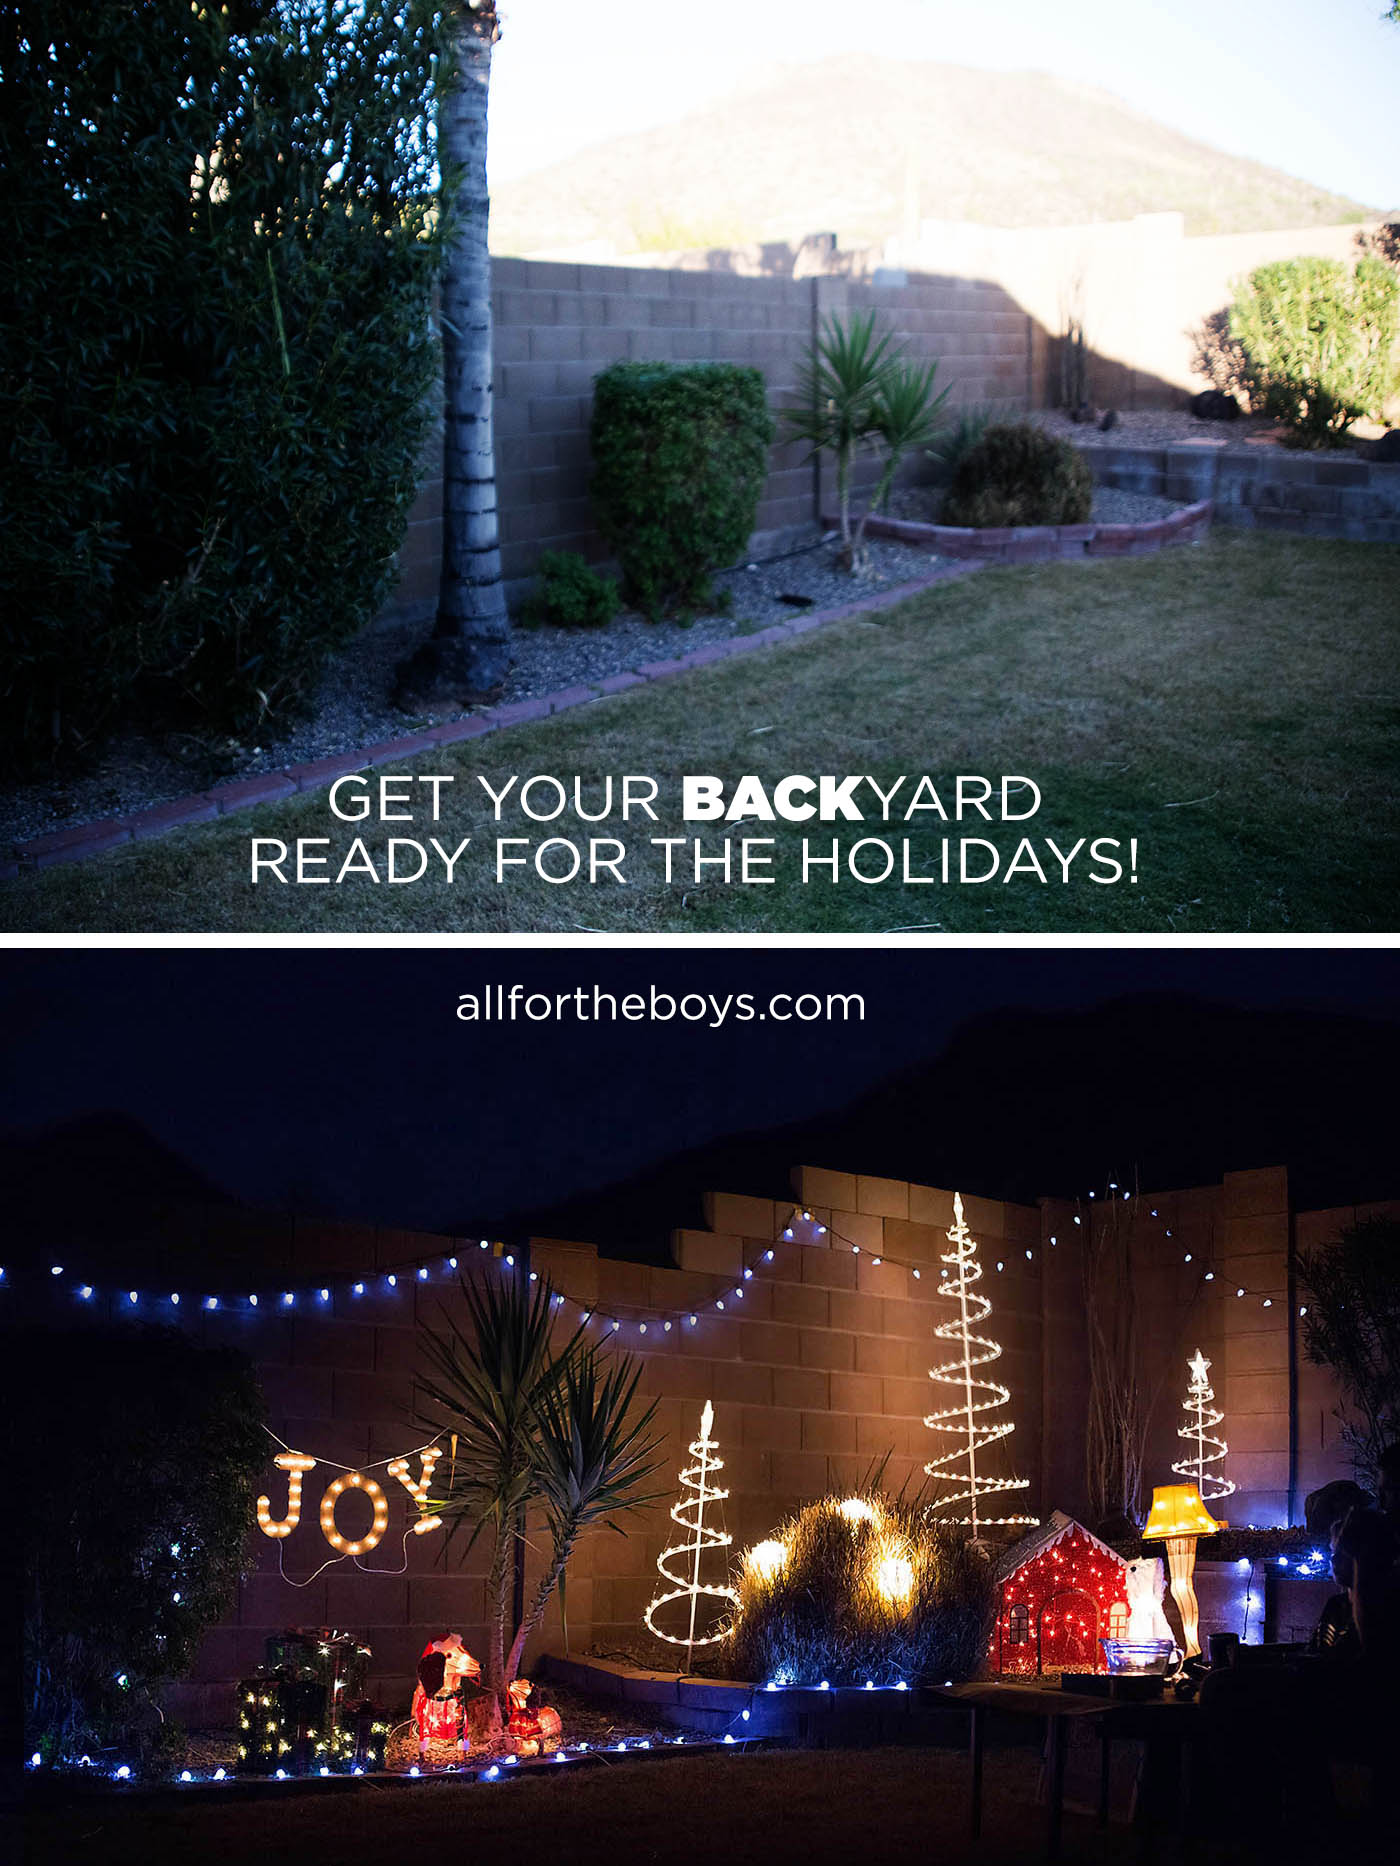 Get your BACKyard ready for holiday entertaining!